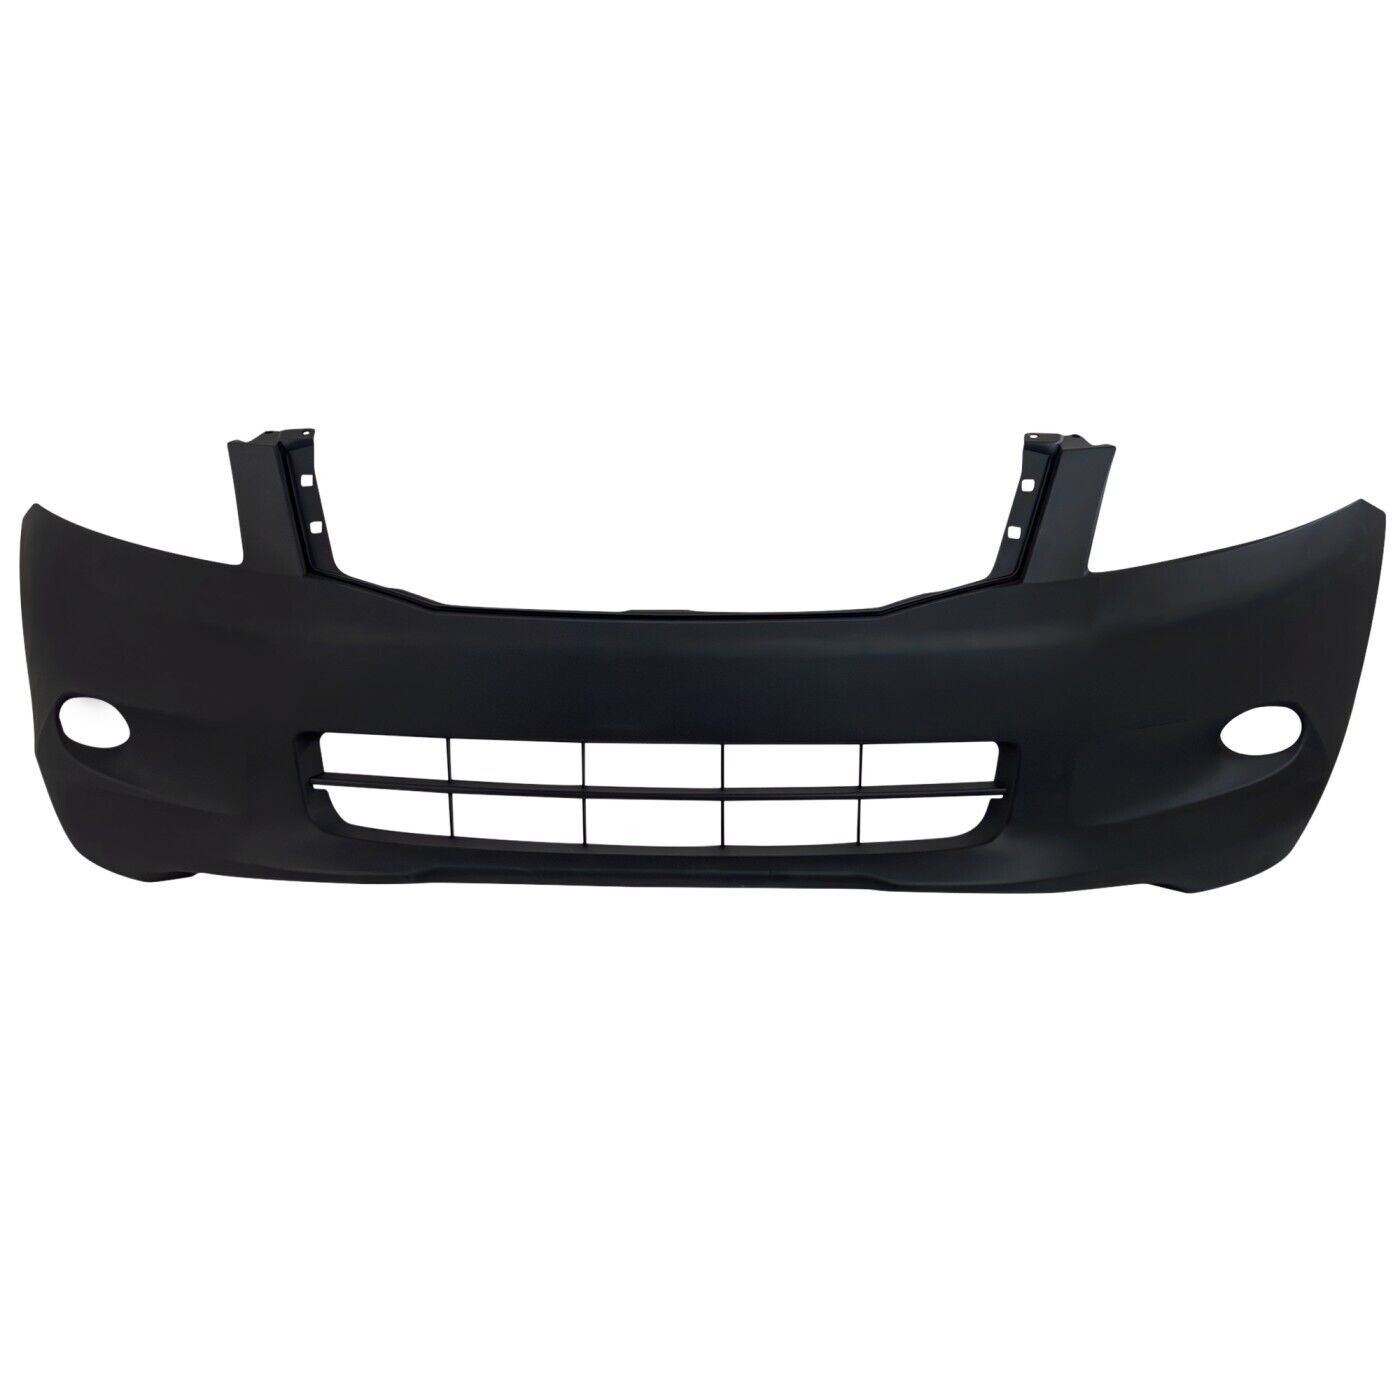 Front Bumper Cover For 2008-2010 Honda Accord Sedan With fog lamp Holes Primed